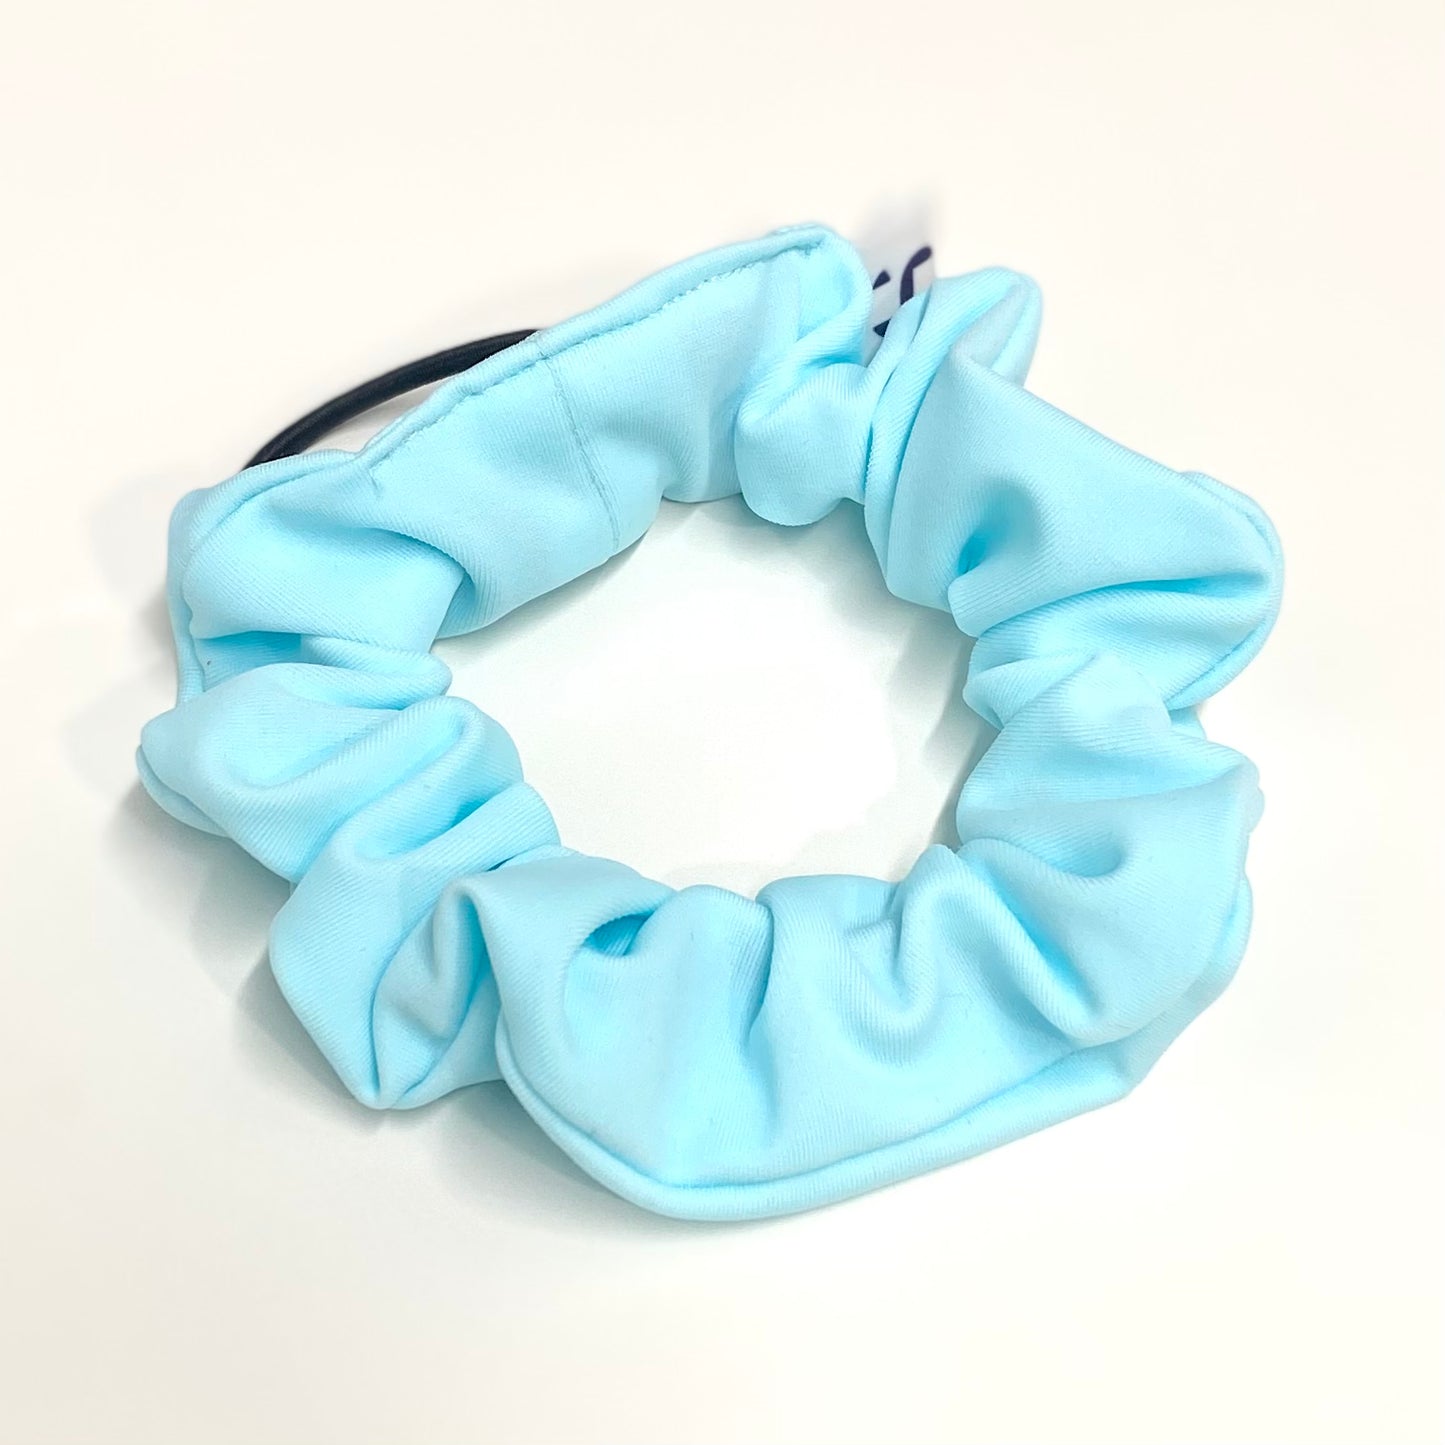 Hairstrong Original Strongband - Icy Blue